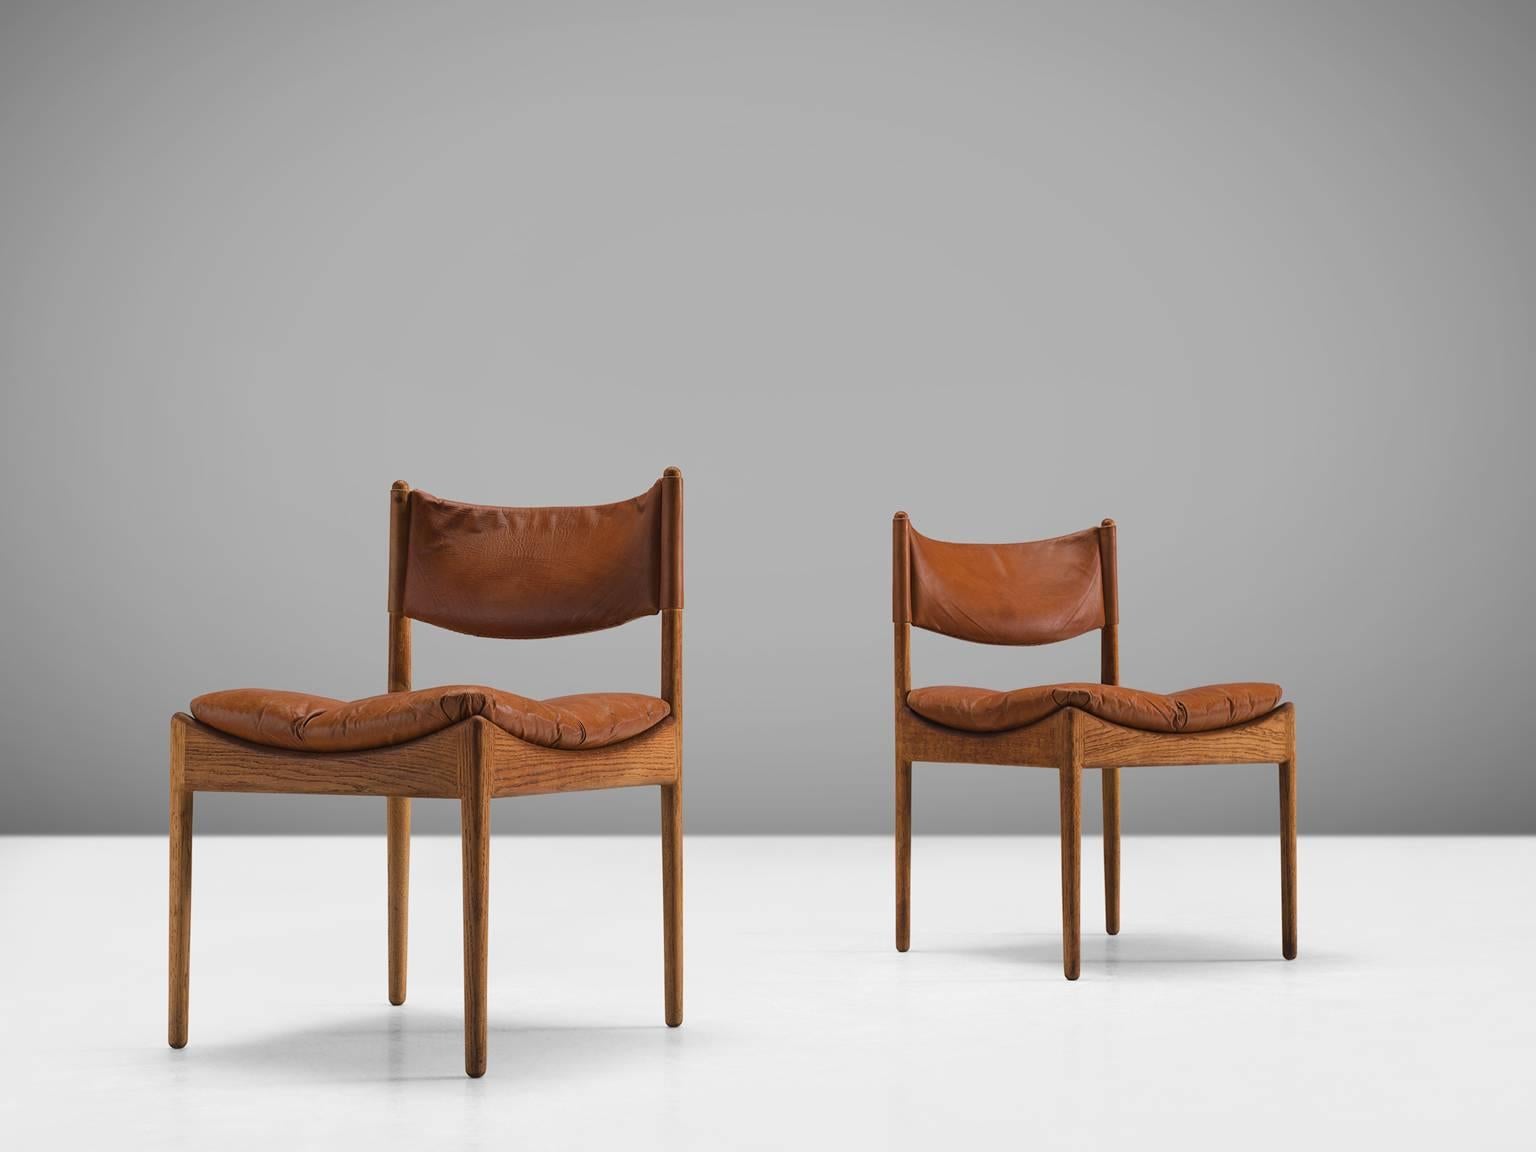 Kristian Solmer Vedel for Søren Willadsen, side chairs 'Modus', in oak and cognac leather, Denmark, 1963.

This set of two side chairs is one of Vedel's most popular designs. The chairs feature a soft, loose cushion of leather. The backs and arms